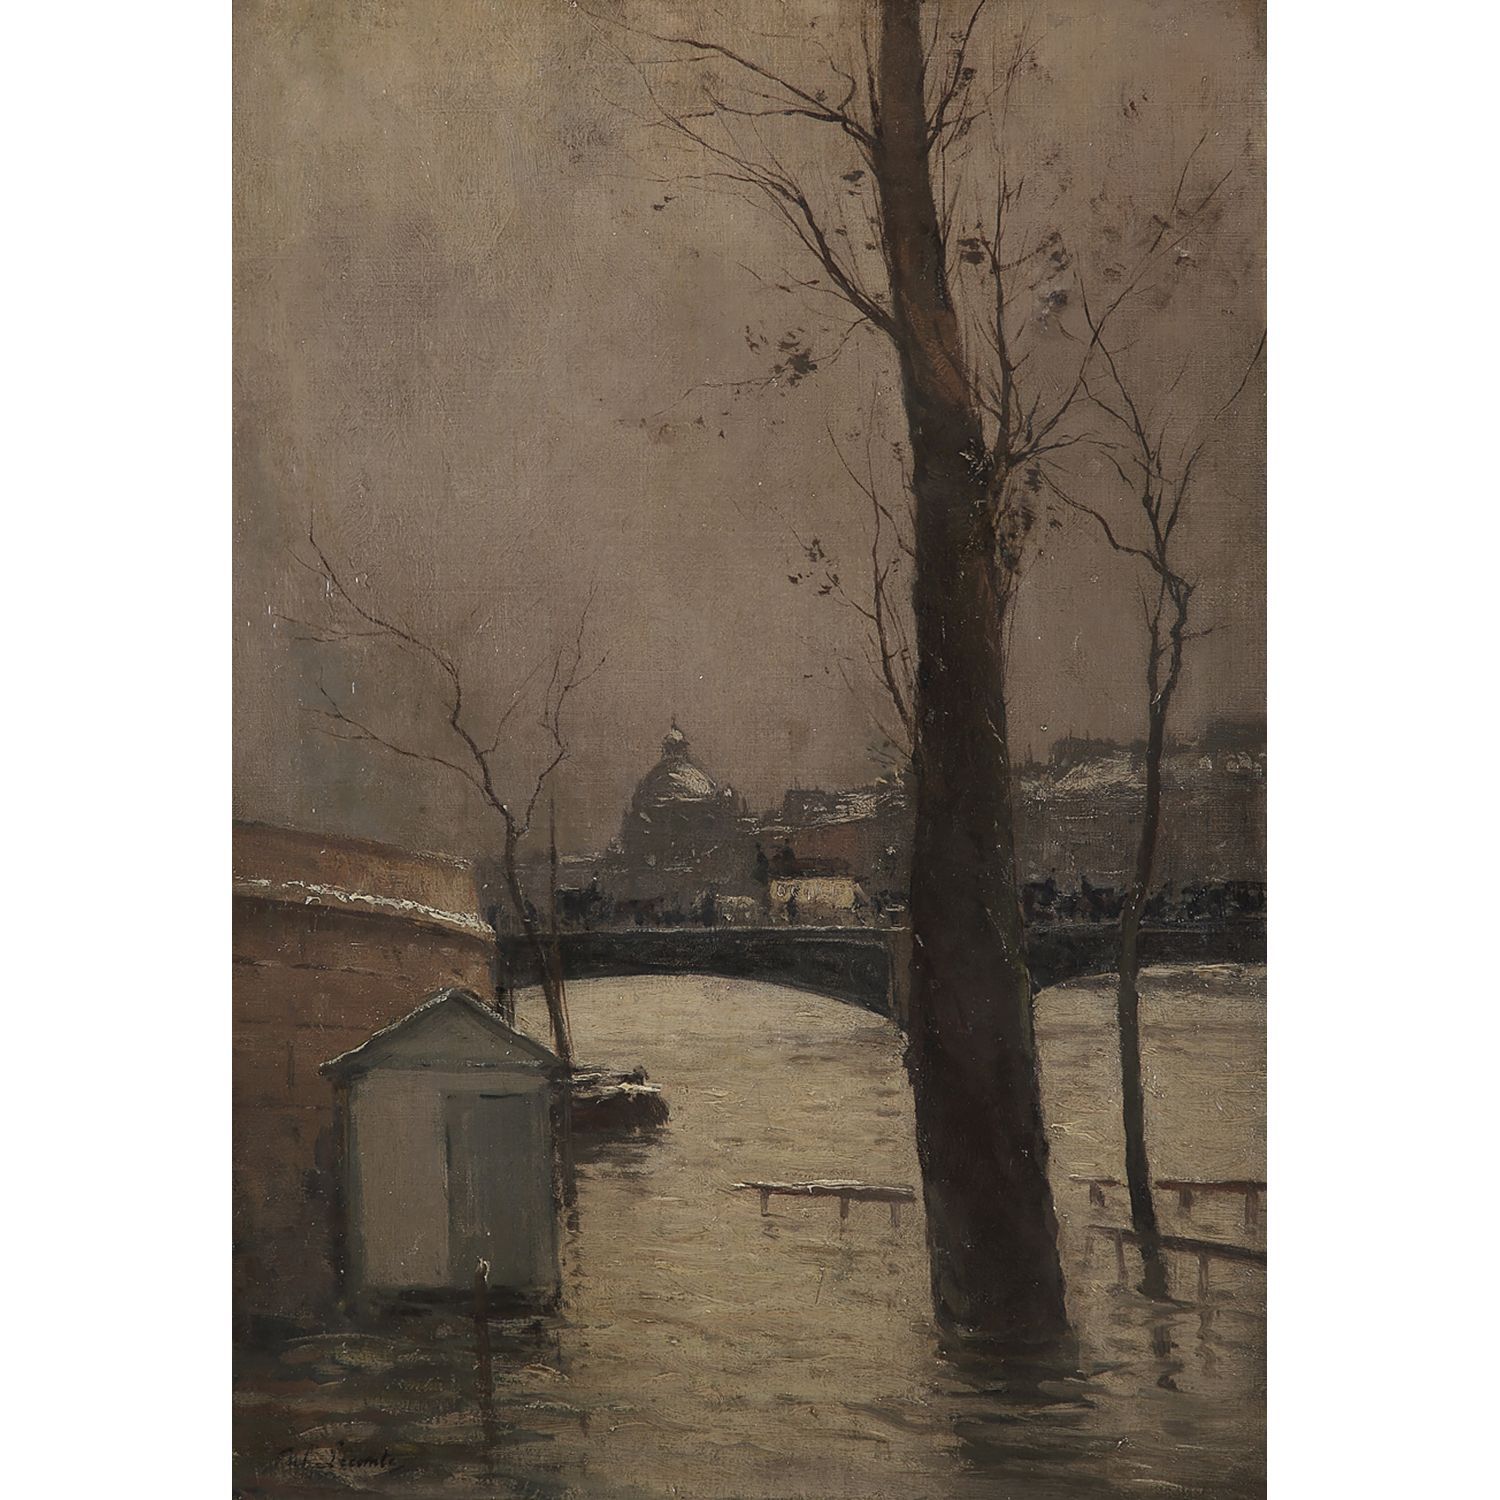 Null PAUL LECOMTE (1942-1920)

THE SEINE IN SNOWY WEATHER

Oil on canvas 

Signe&hellip;